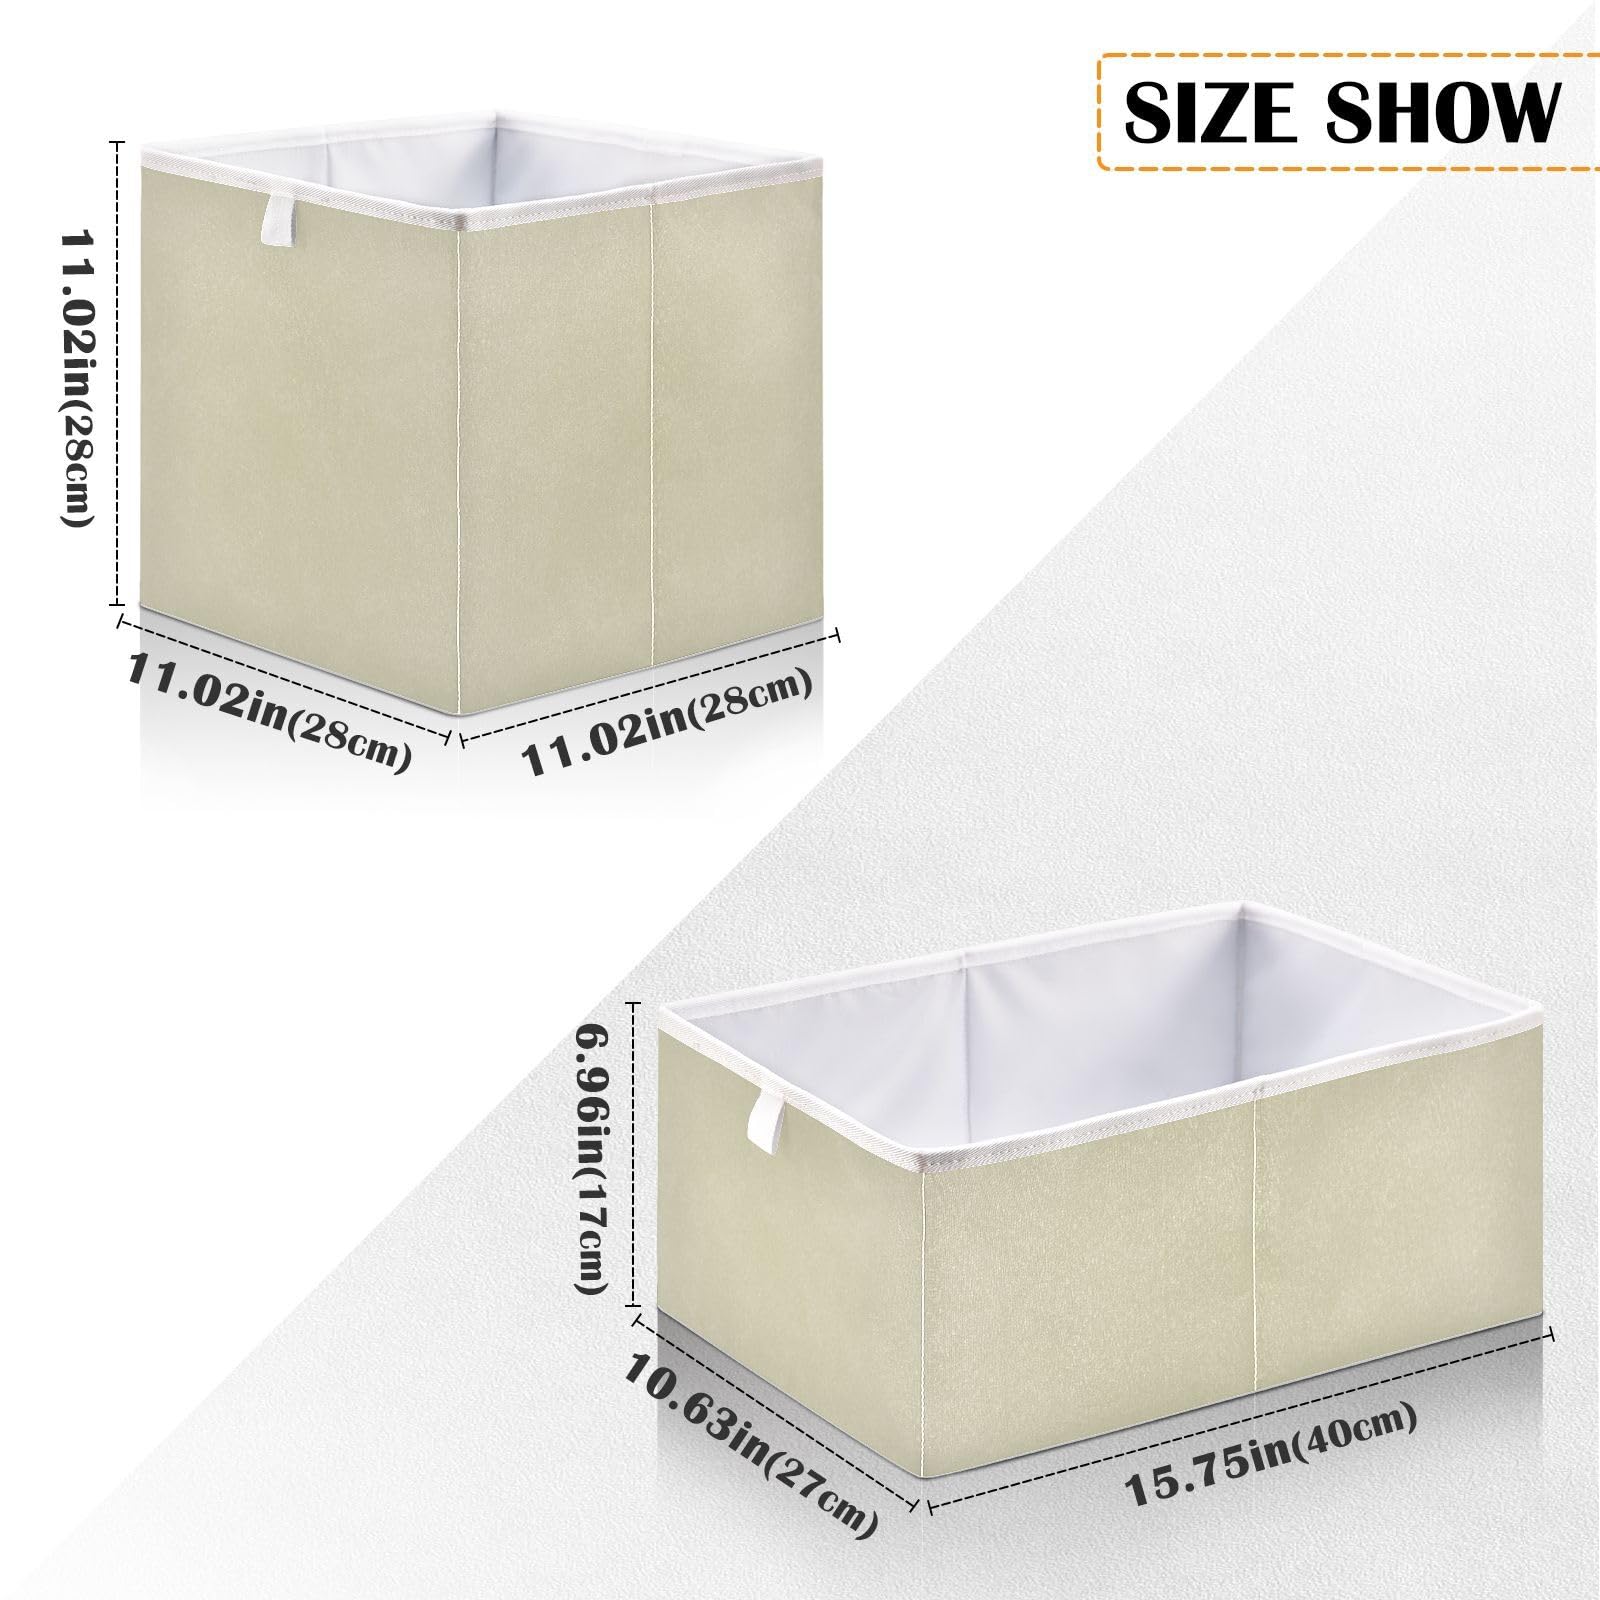 Ollabaky Solid Color Closet Storage Bin Beige Fabric Storage Cube Collapsible Waterproof Basket Box Toy Bin Clothes Organizer for Shelves Drawers, S